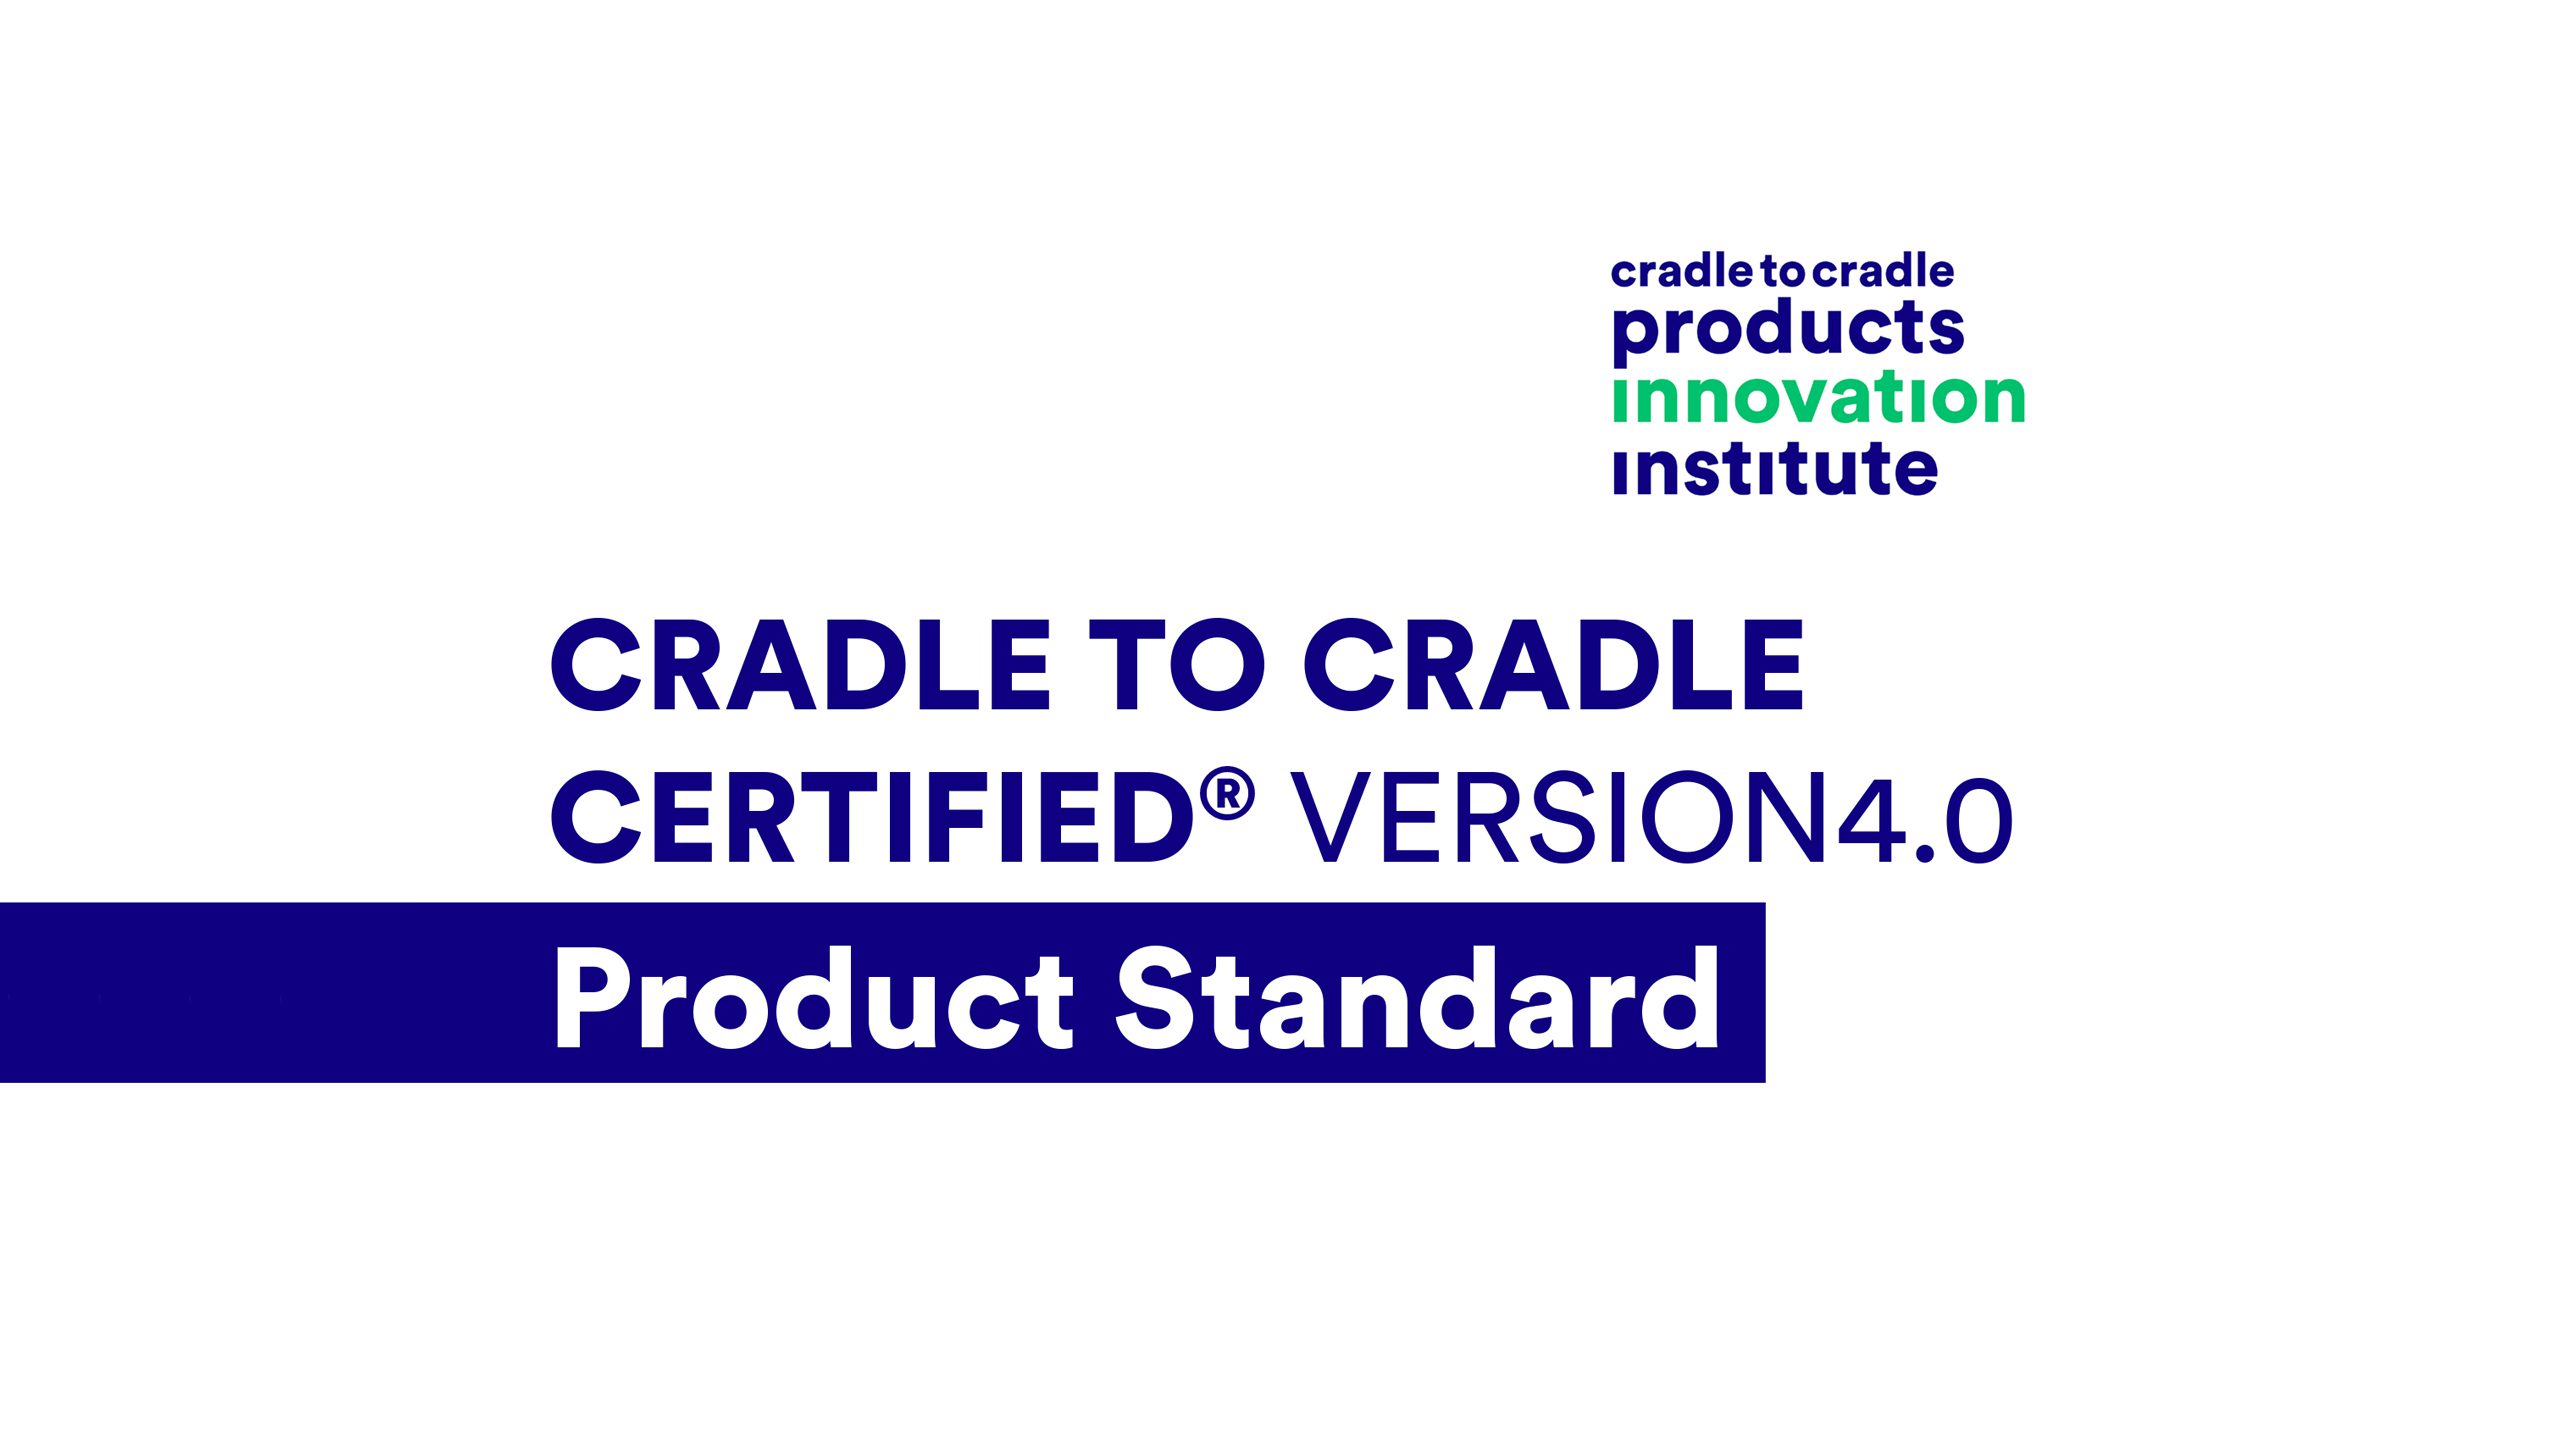 Post regisseur binnen Get Cradle to Cradle Certified®: What to know about the transition from  Version 3.1 to 4.0 - MBDC